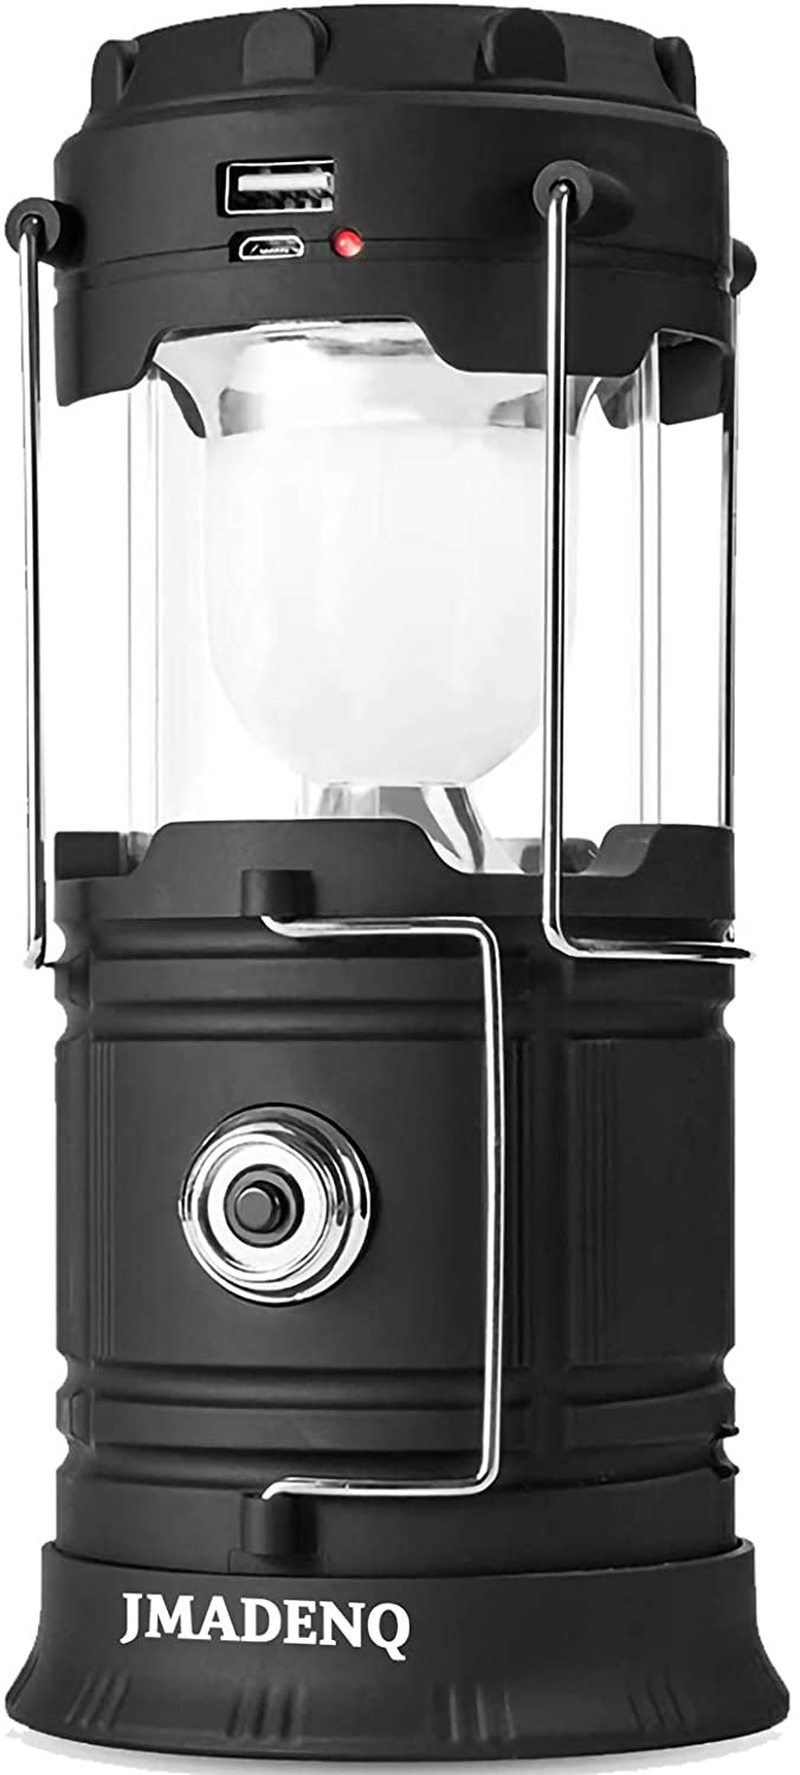 Lanterns, Camping Lantern, Solar Lantern Flashlights Charging for Phone, USB Rechargeable Led Camping Lantern, Collapsible & Portable for Emergency, Hurricanes, Power Outage, Storm (2 Pack) Home & Garden > Lighting > Lamps JMADENQ Black 1  